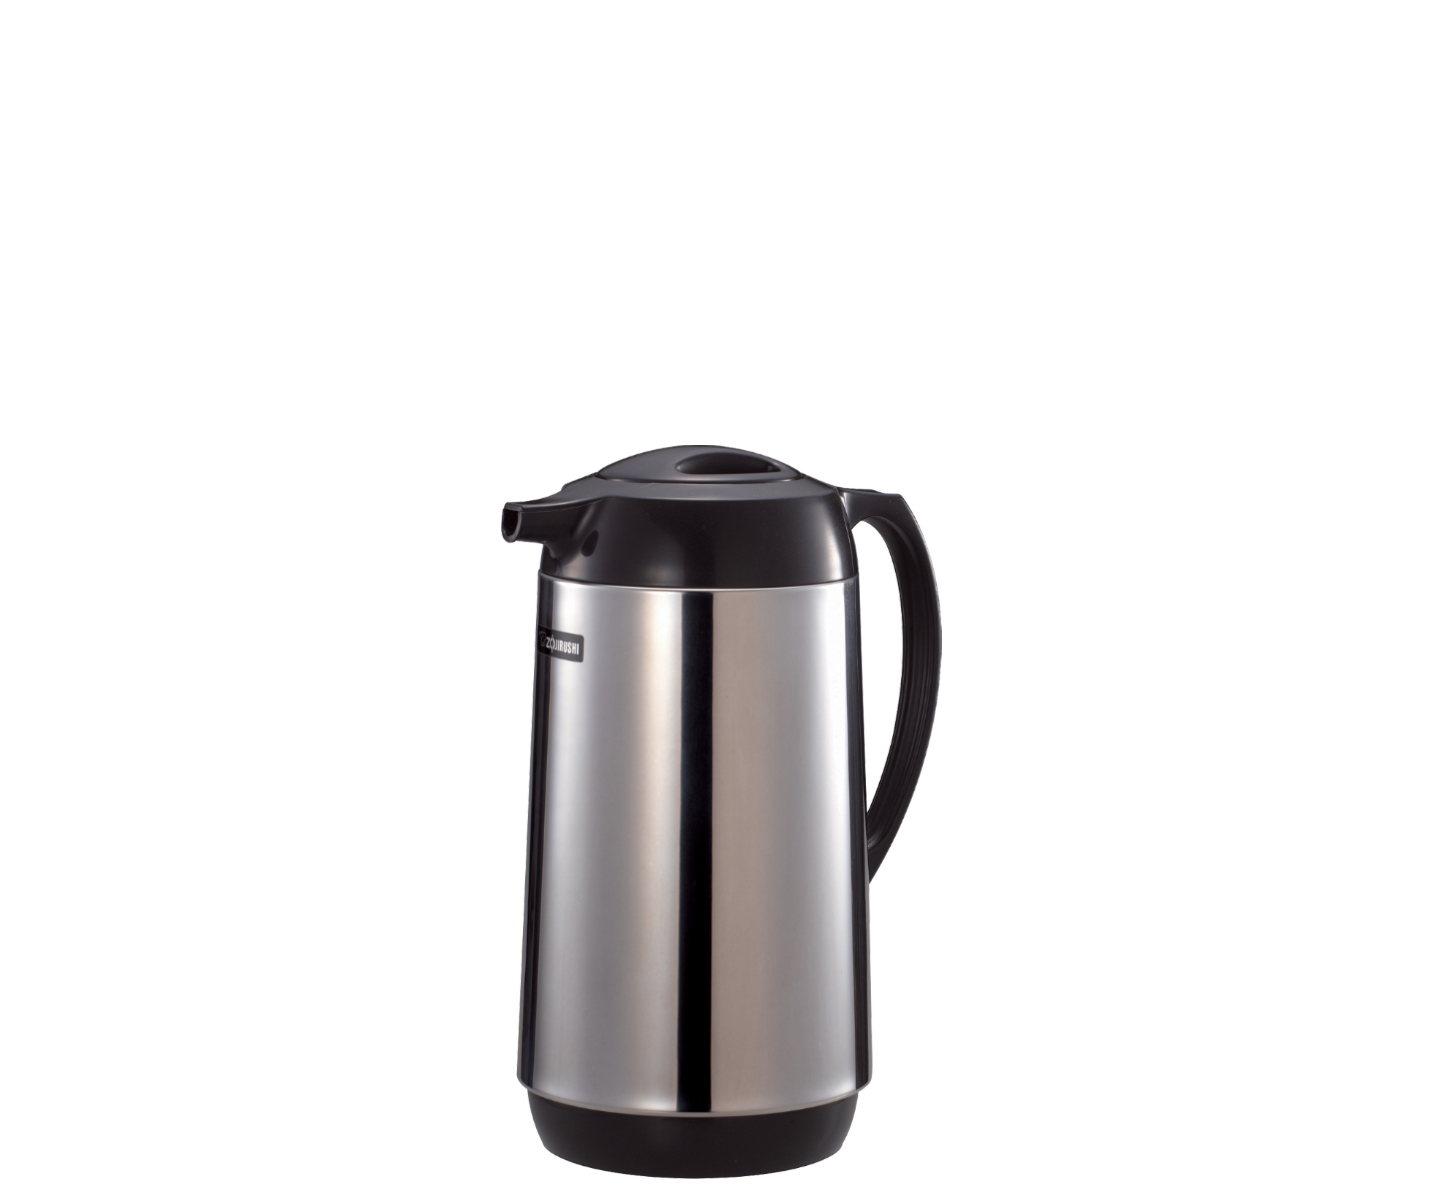 10 oz Embossed 18/8 Stainless Steel Thermos Mug - eGPS Solutions Inc.